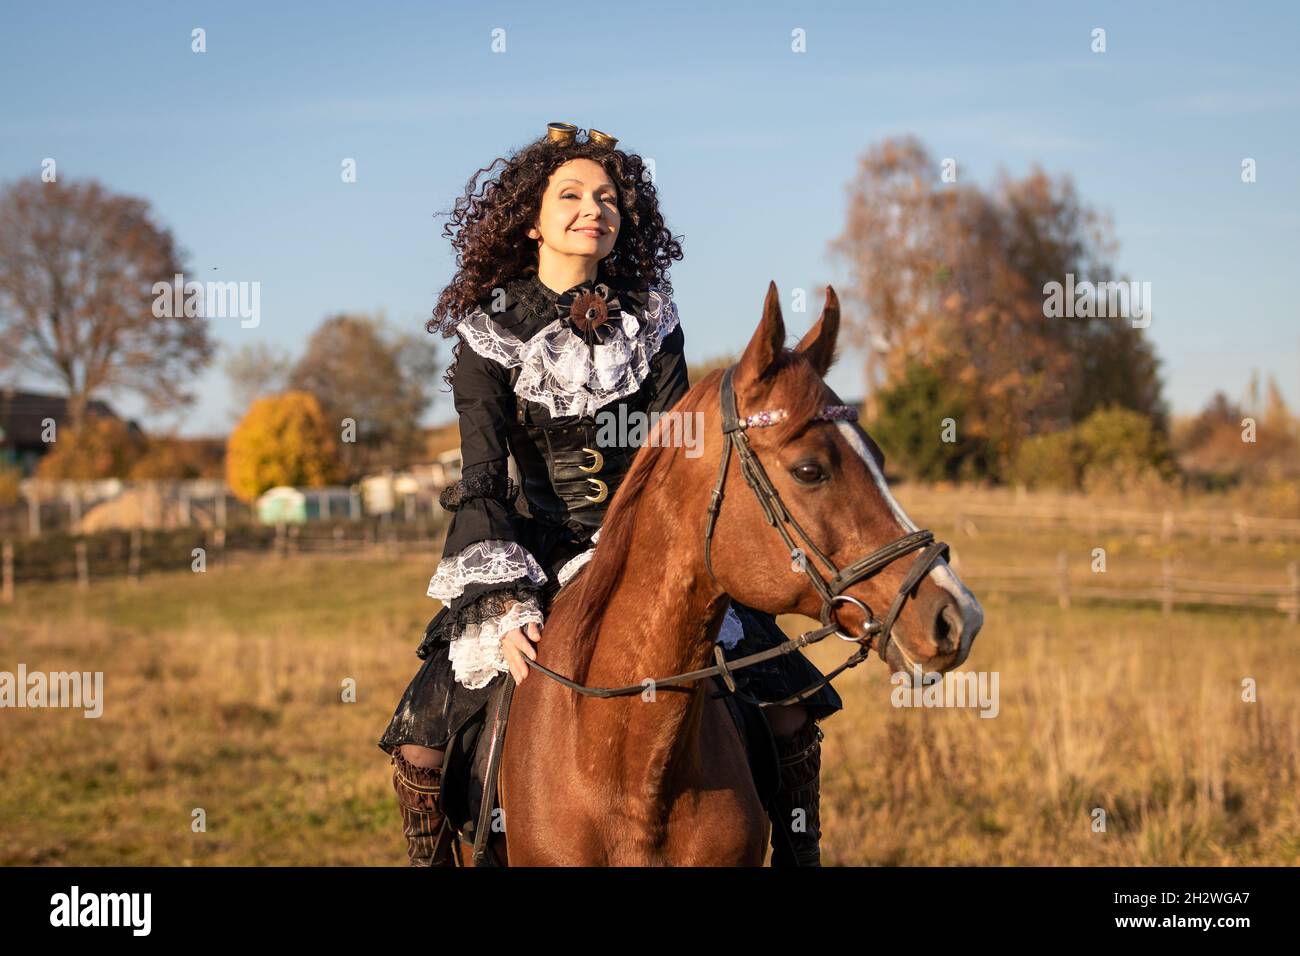 Portrait of a mature woman in a steampunk costume on a horse against the backdrop of an autumn landscape. Stock Photo